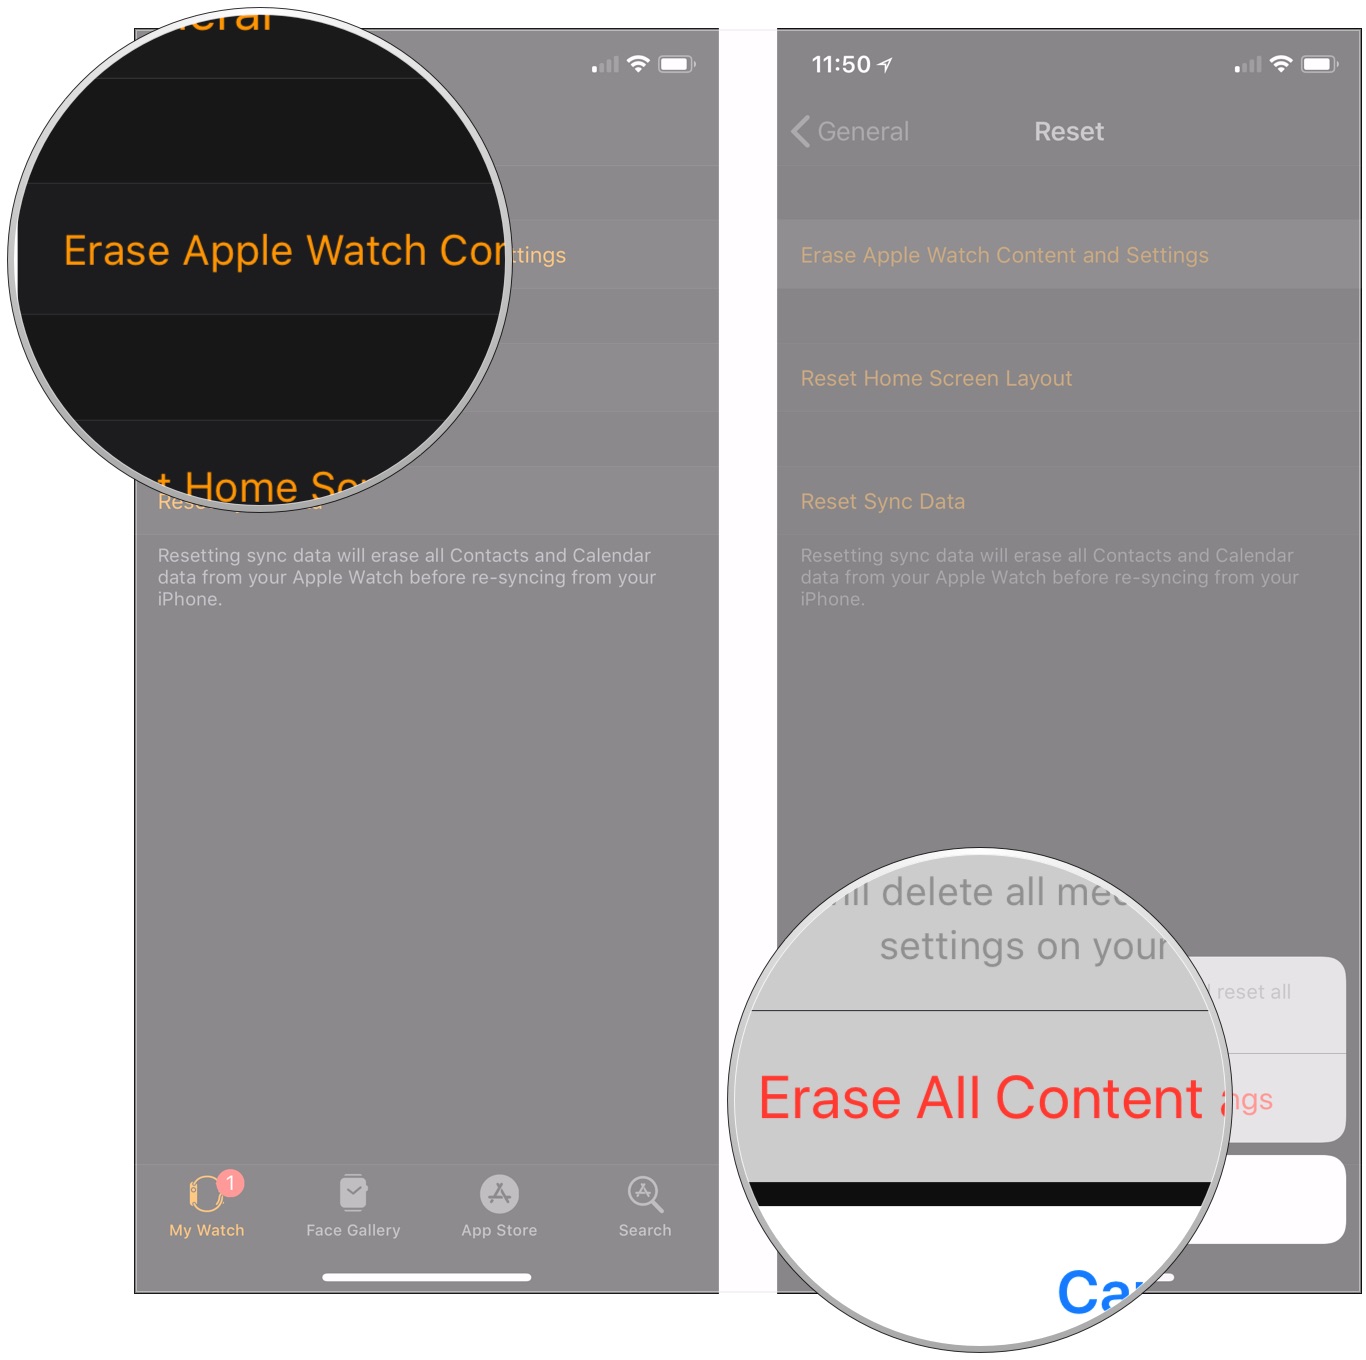 Tap Erase Apple Watch Content and Settings, tap Erase All Content and Settings